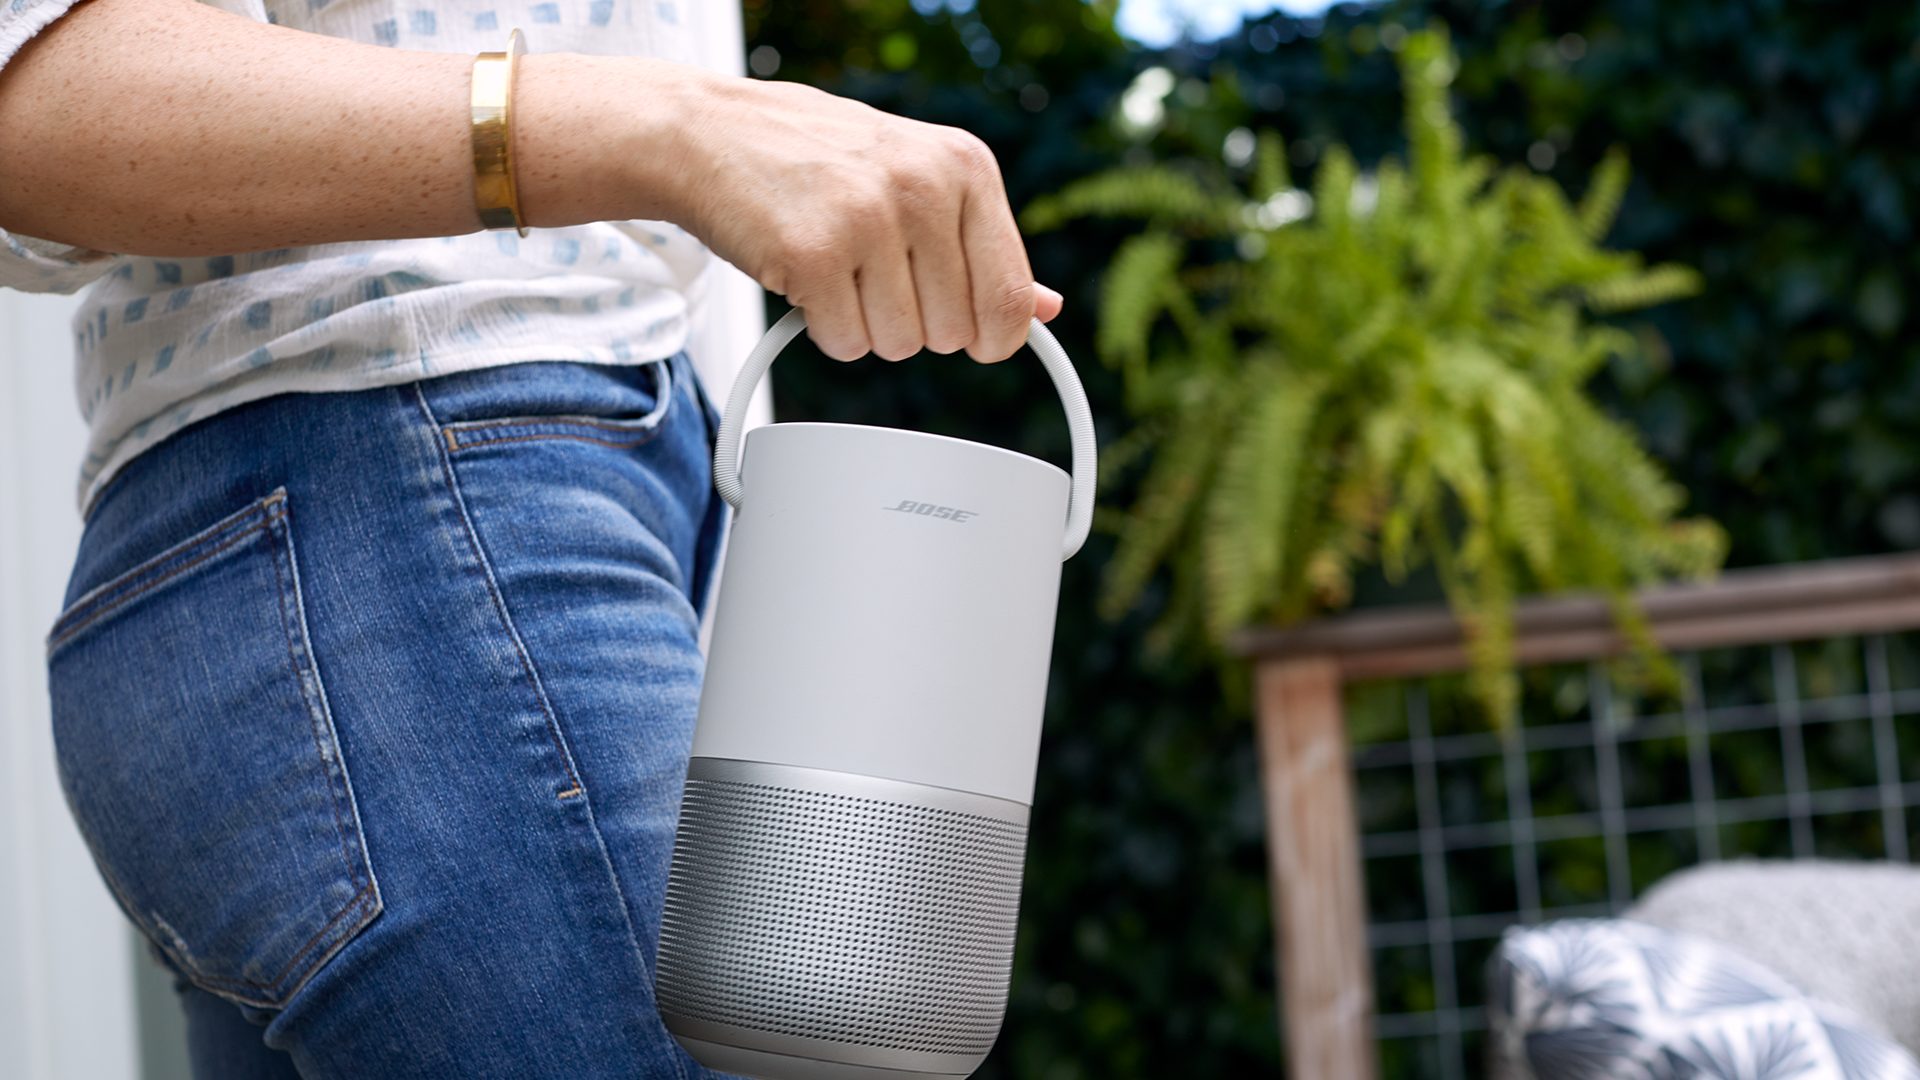 Bose Portable Smart Speaker carried outdoors